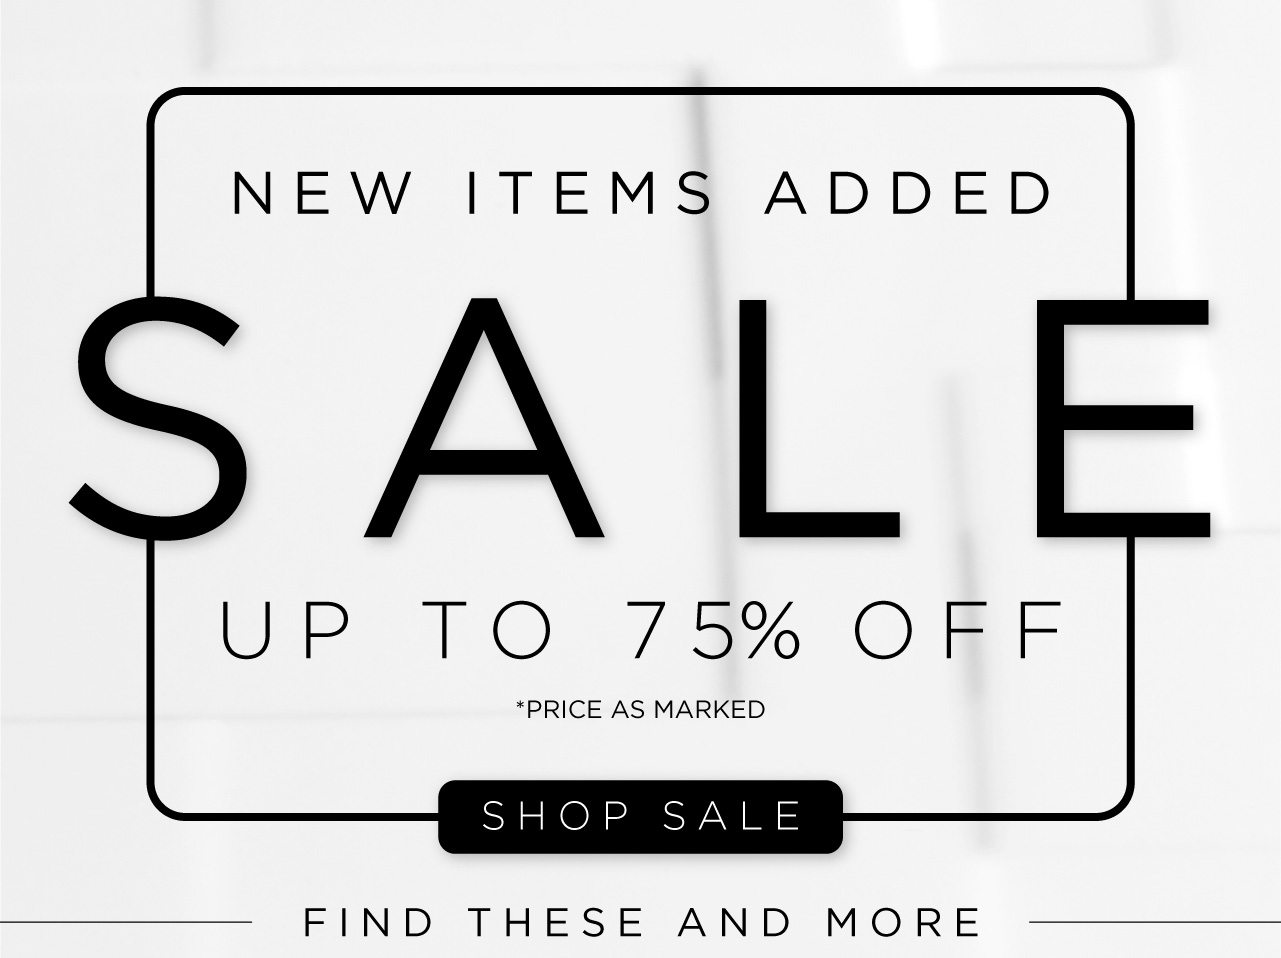 New Items Added | Sale - Up to 75% off *price as marked